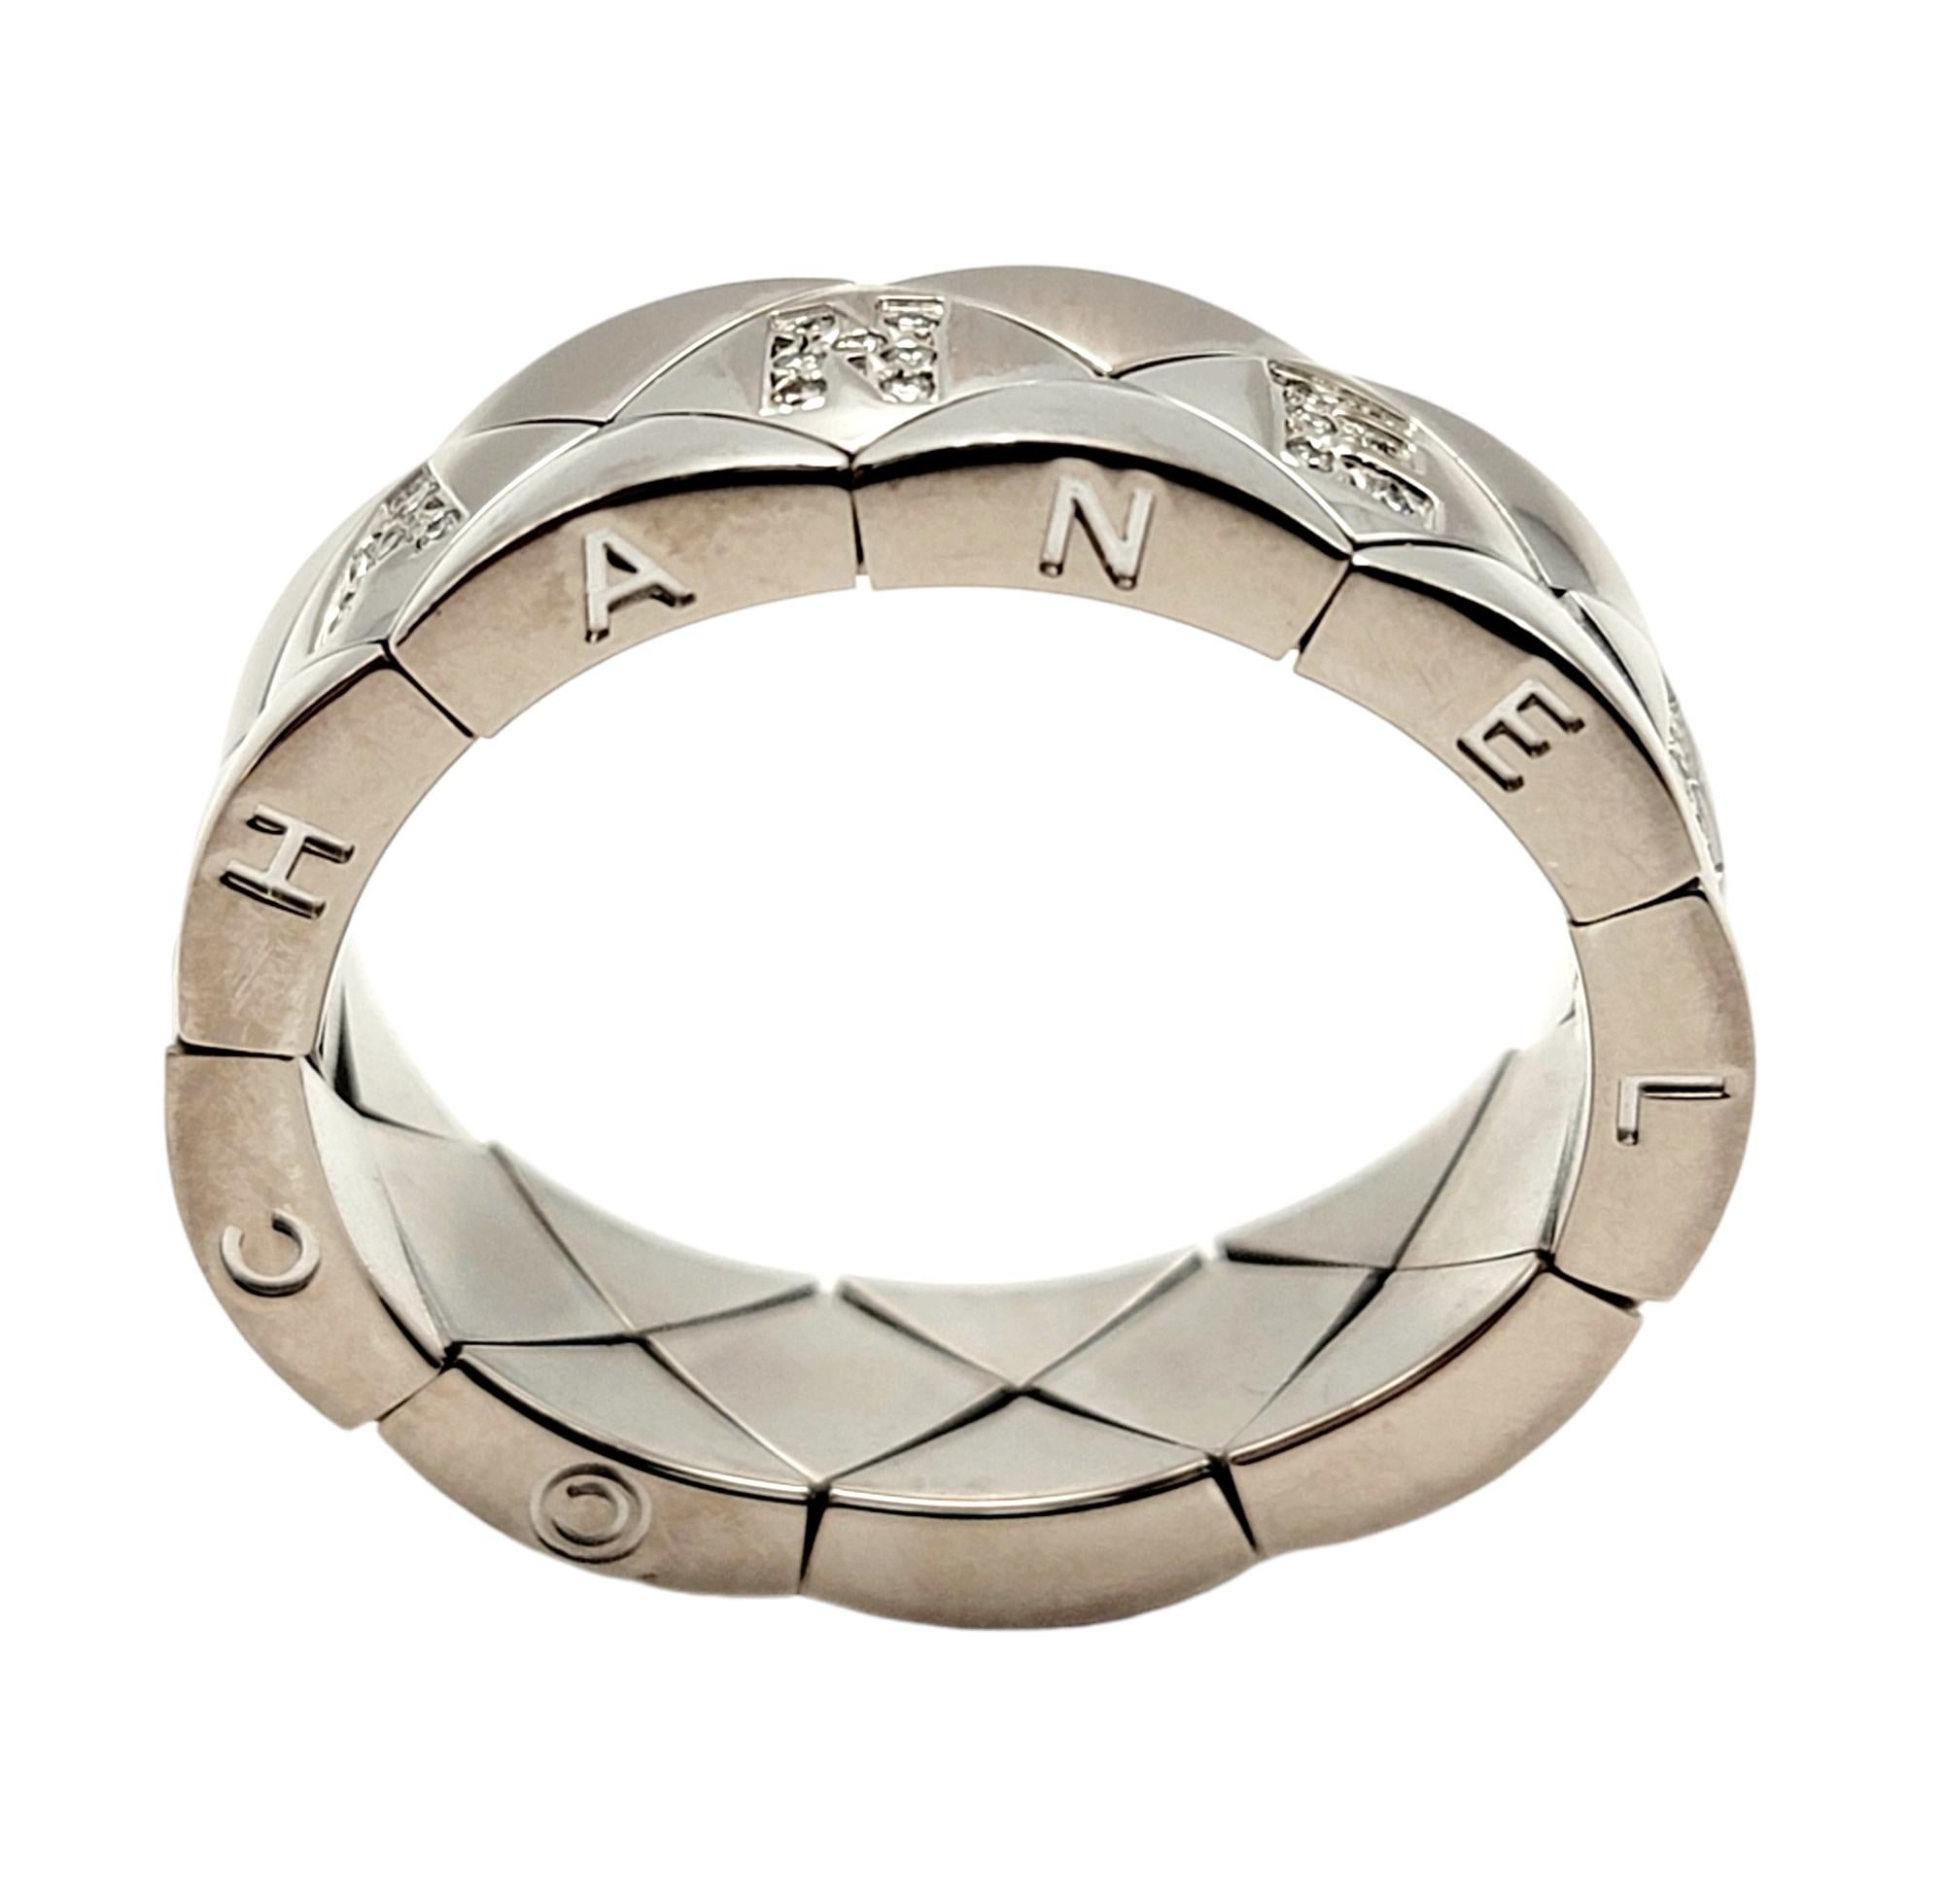 Contemporary Chanel Matelasse Quilted Logo Band Ring 18 Karat White Gold with Diamond Accents